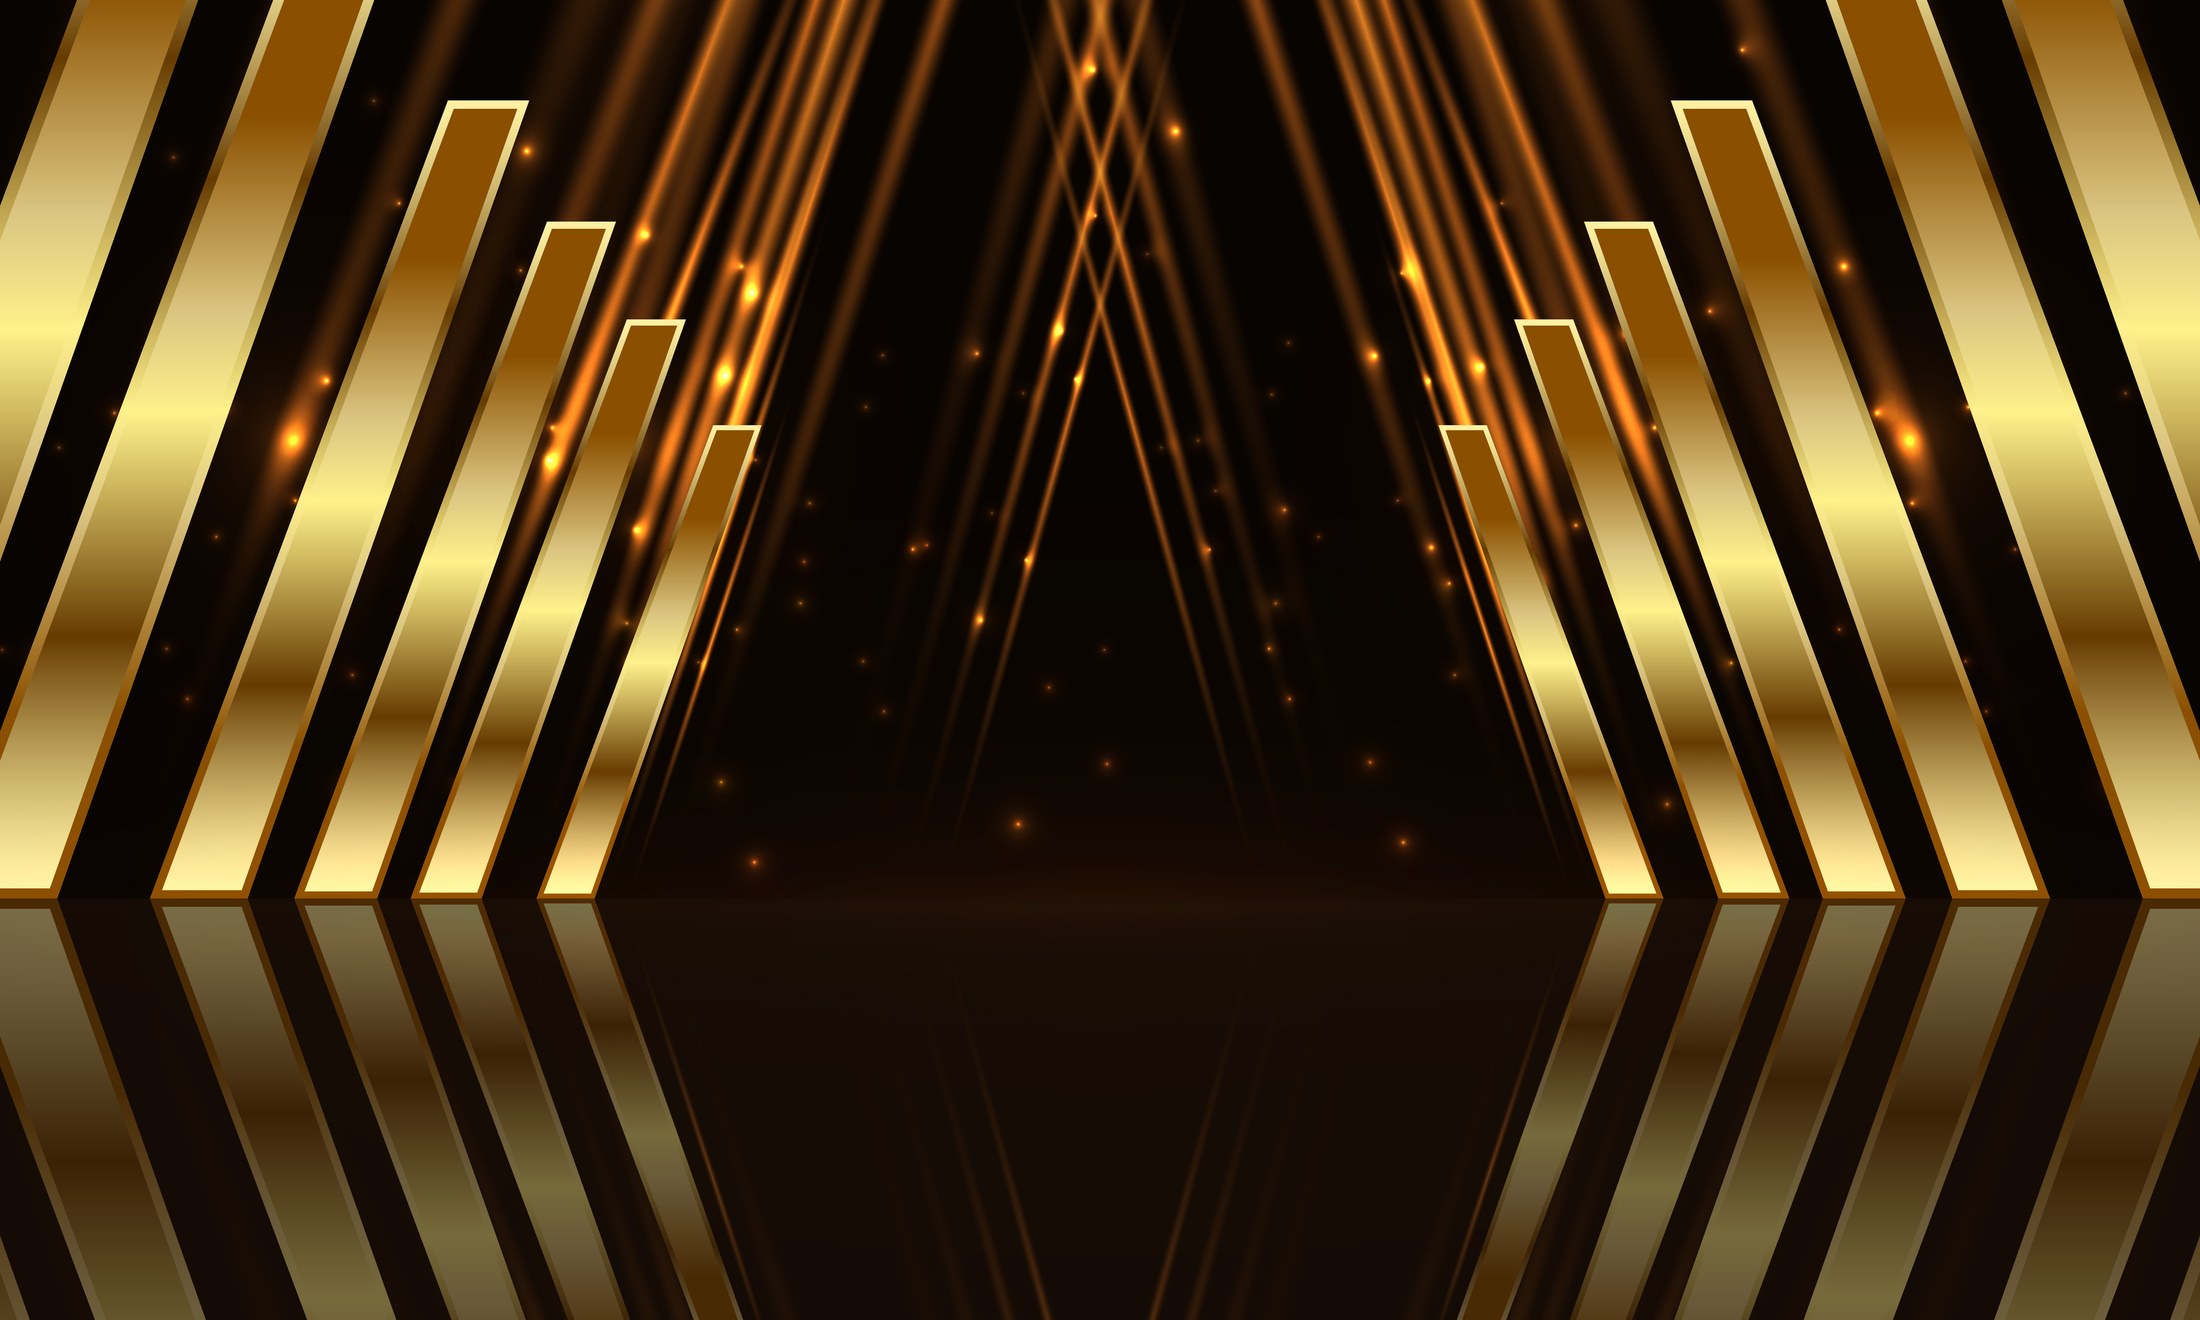 Award ceremony background with golden shapes and light rays.